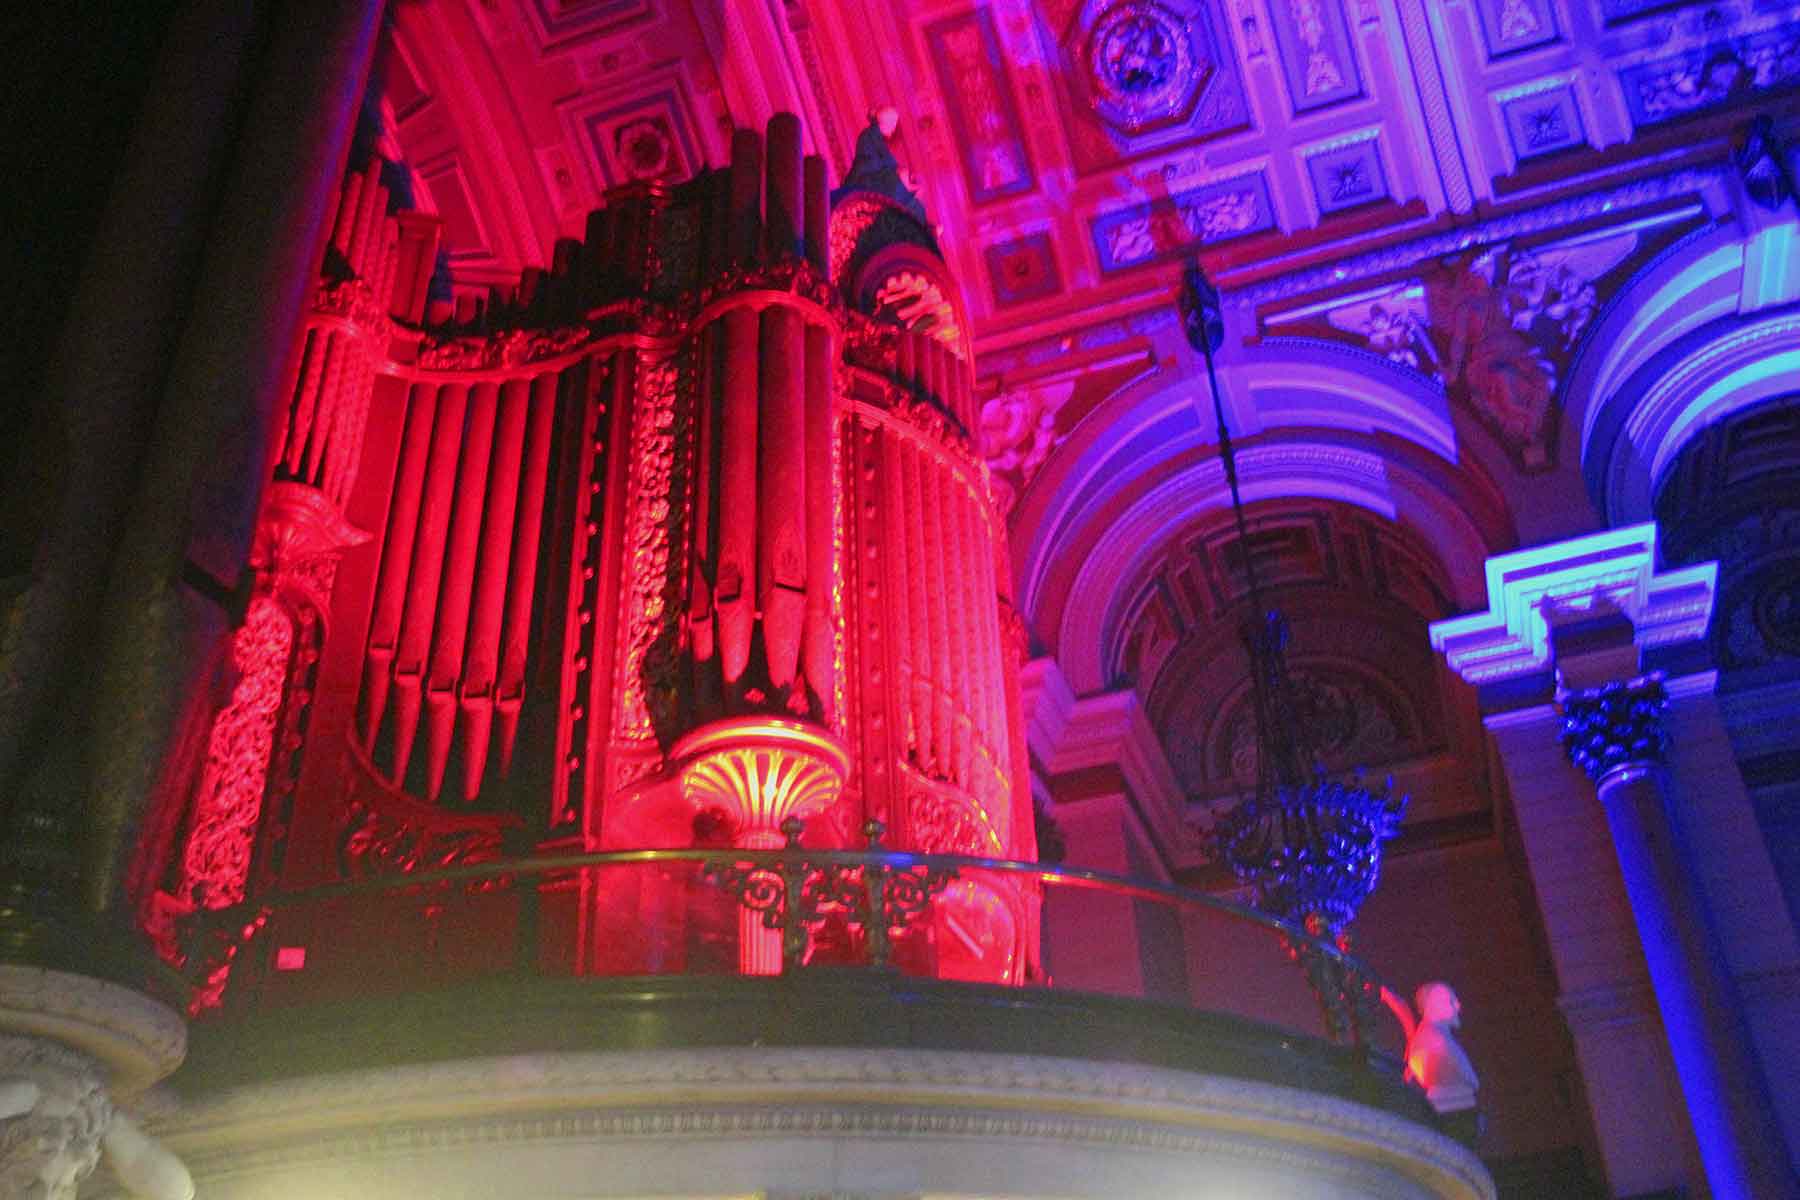 Image of St George's Hall in Liverpool with LED up-lighting lighting the massive organ.